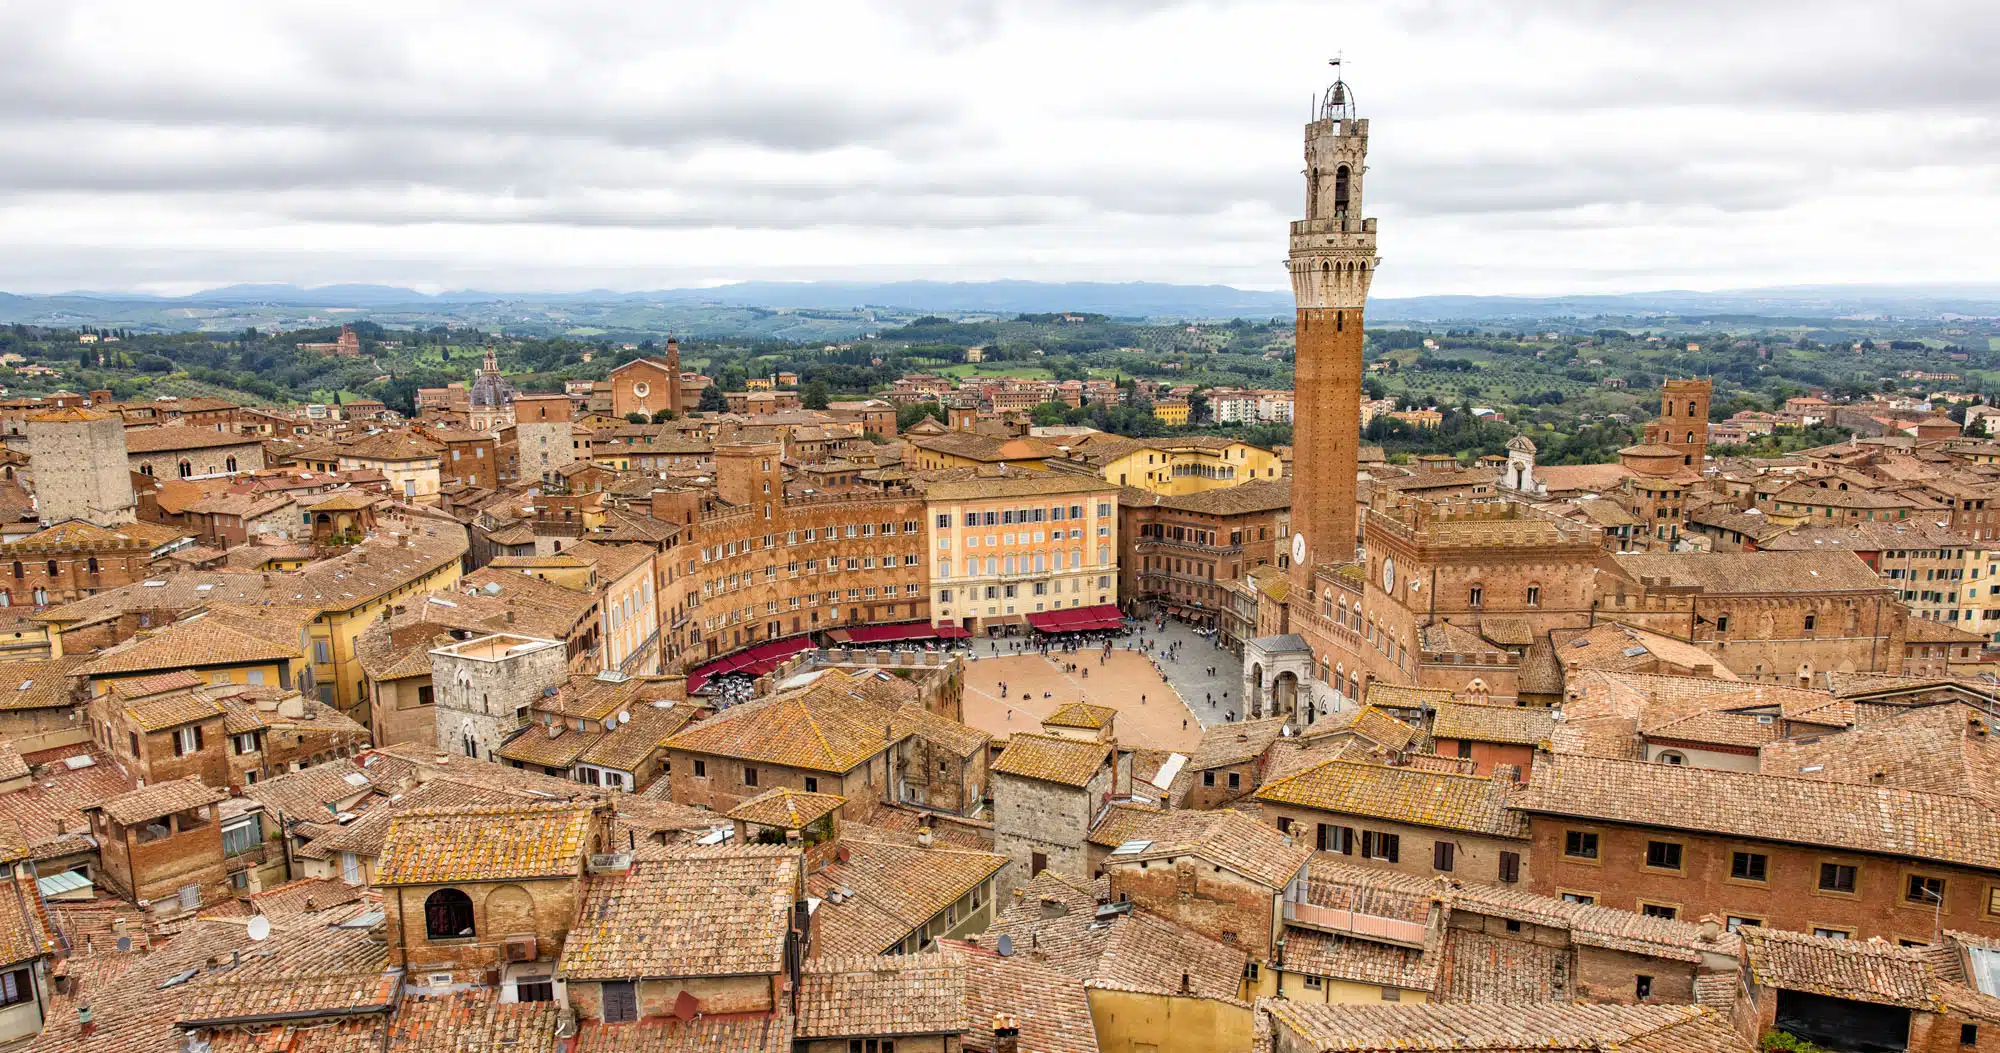 Featured image for “Top 10 Things to Do in Siena, Italy”